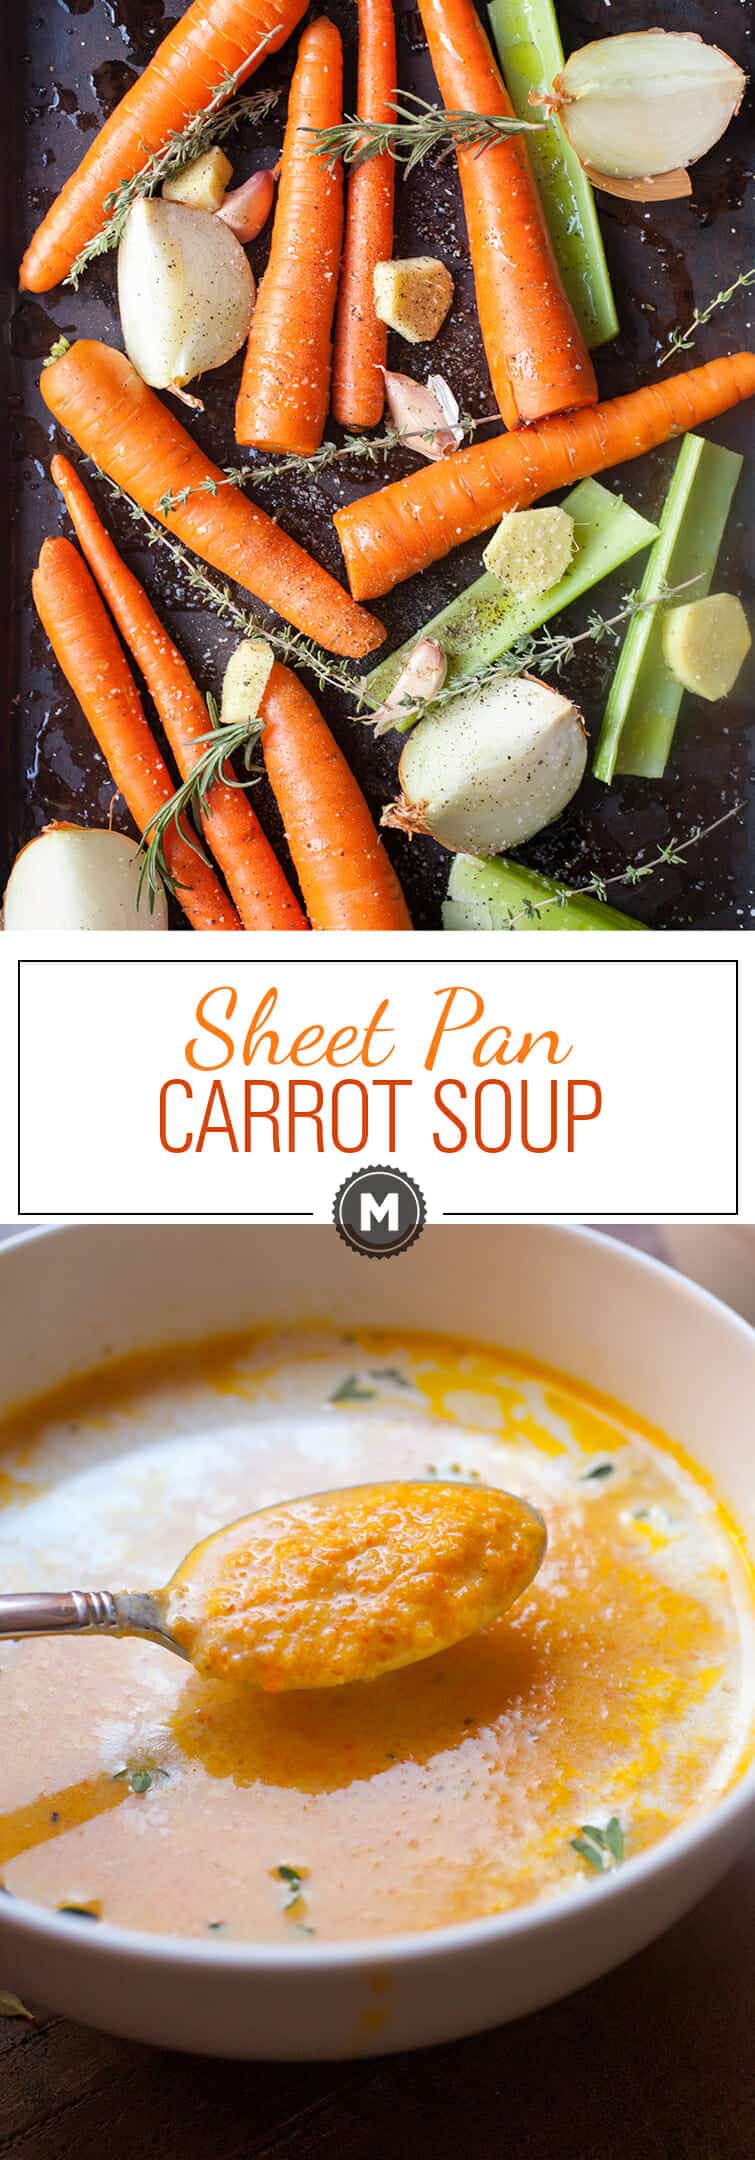 Sheet Pan Carrot Soup: This rich and flavorful carrot soup is SO easy to make. Roast all the ingredients and blend them up! | macheesmo.com